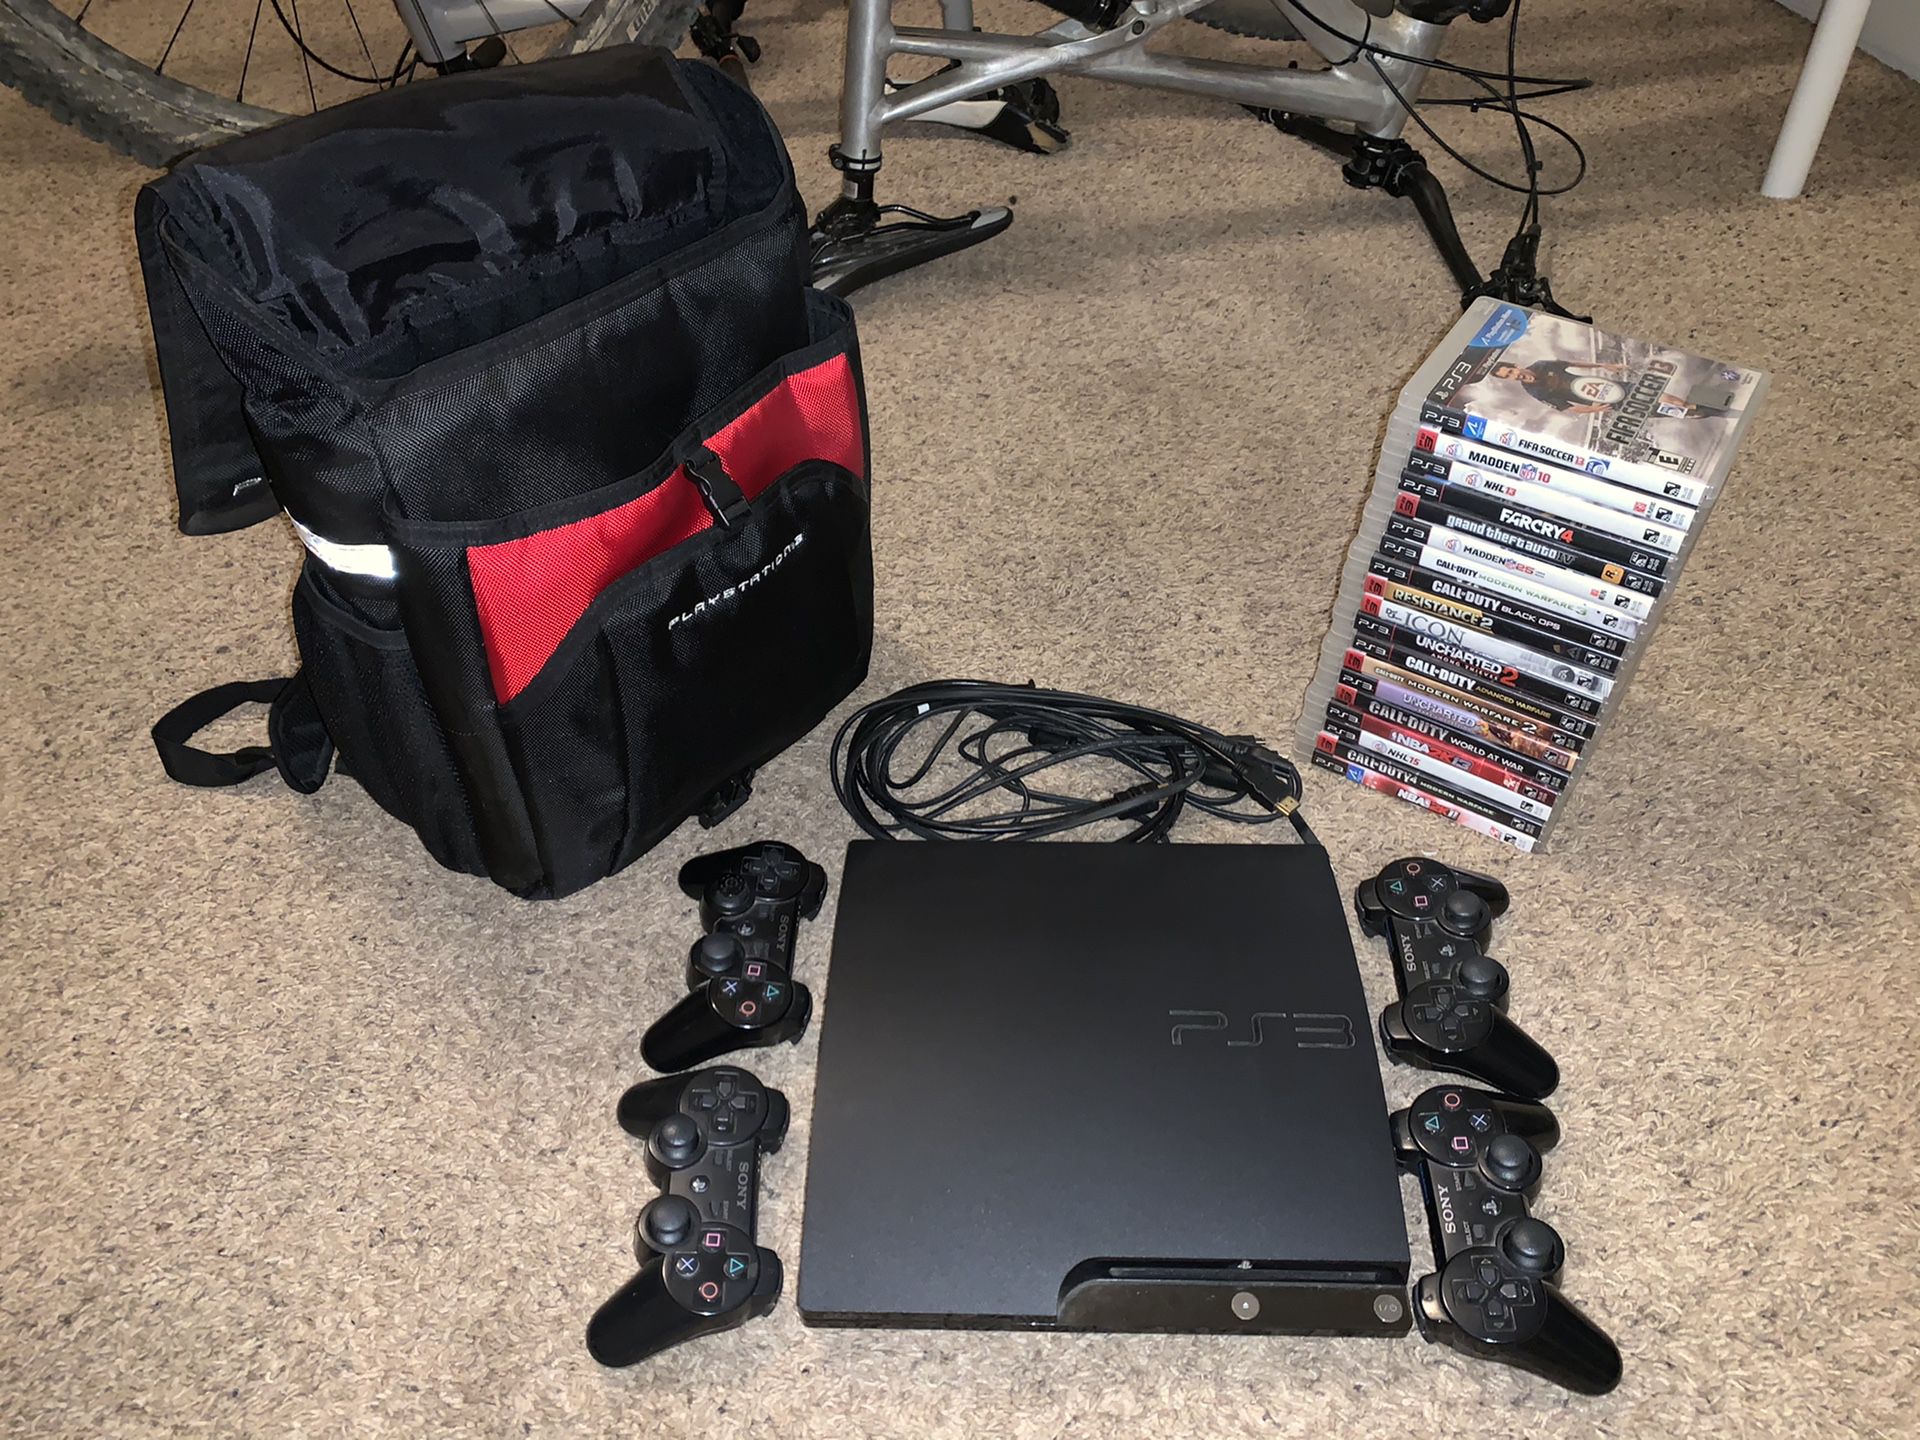 PS3 w/ 19 games, 4 controllers, traveling case